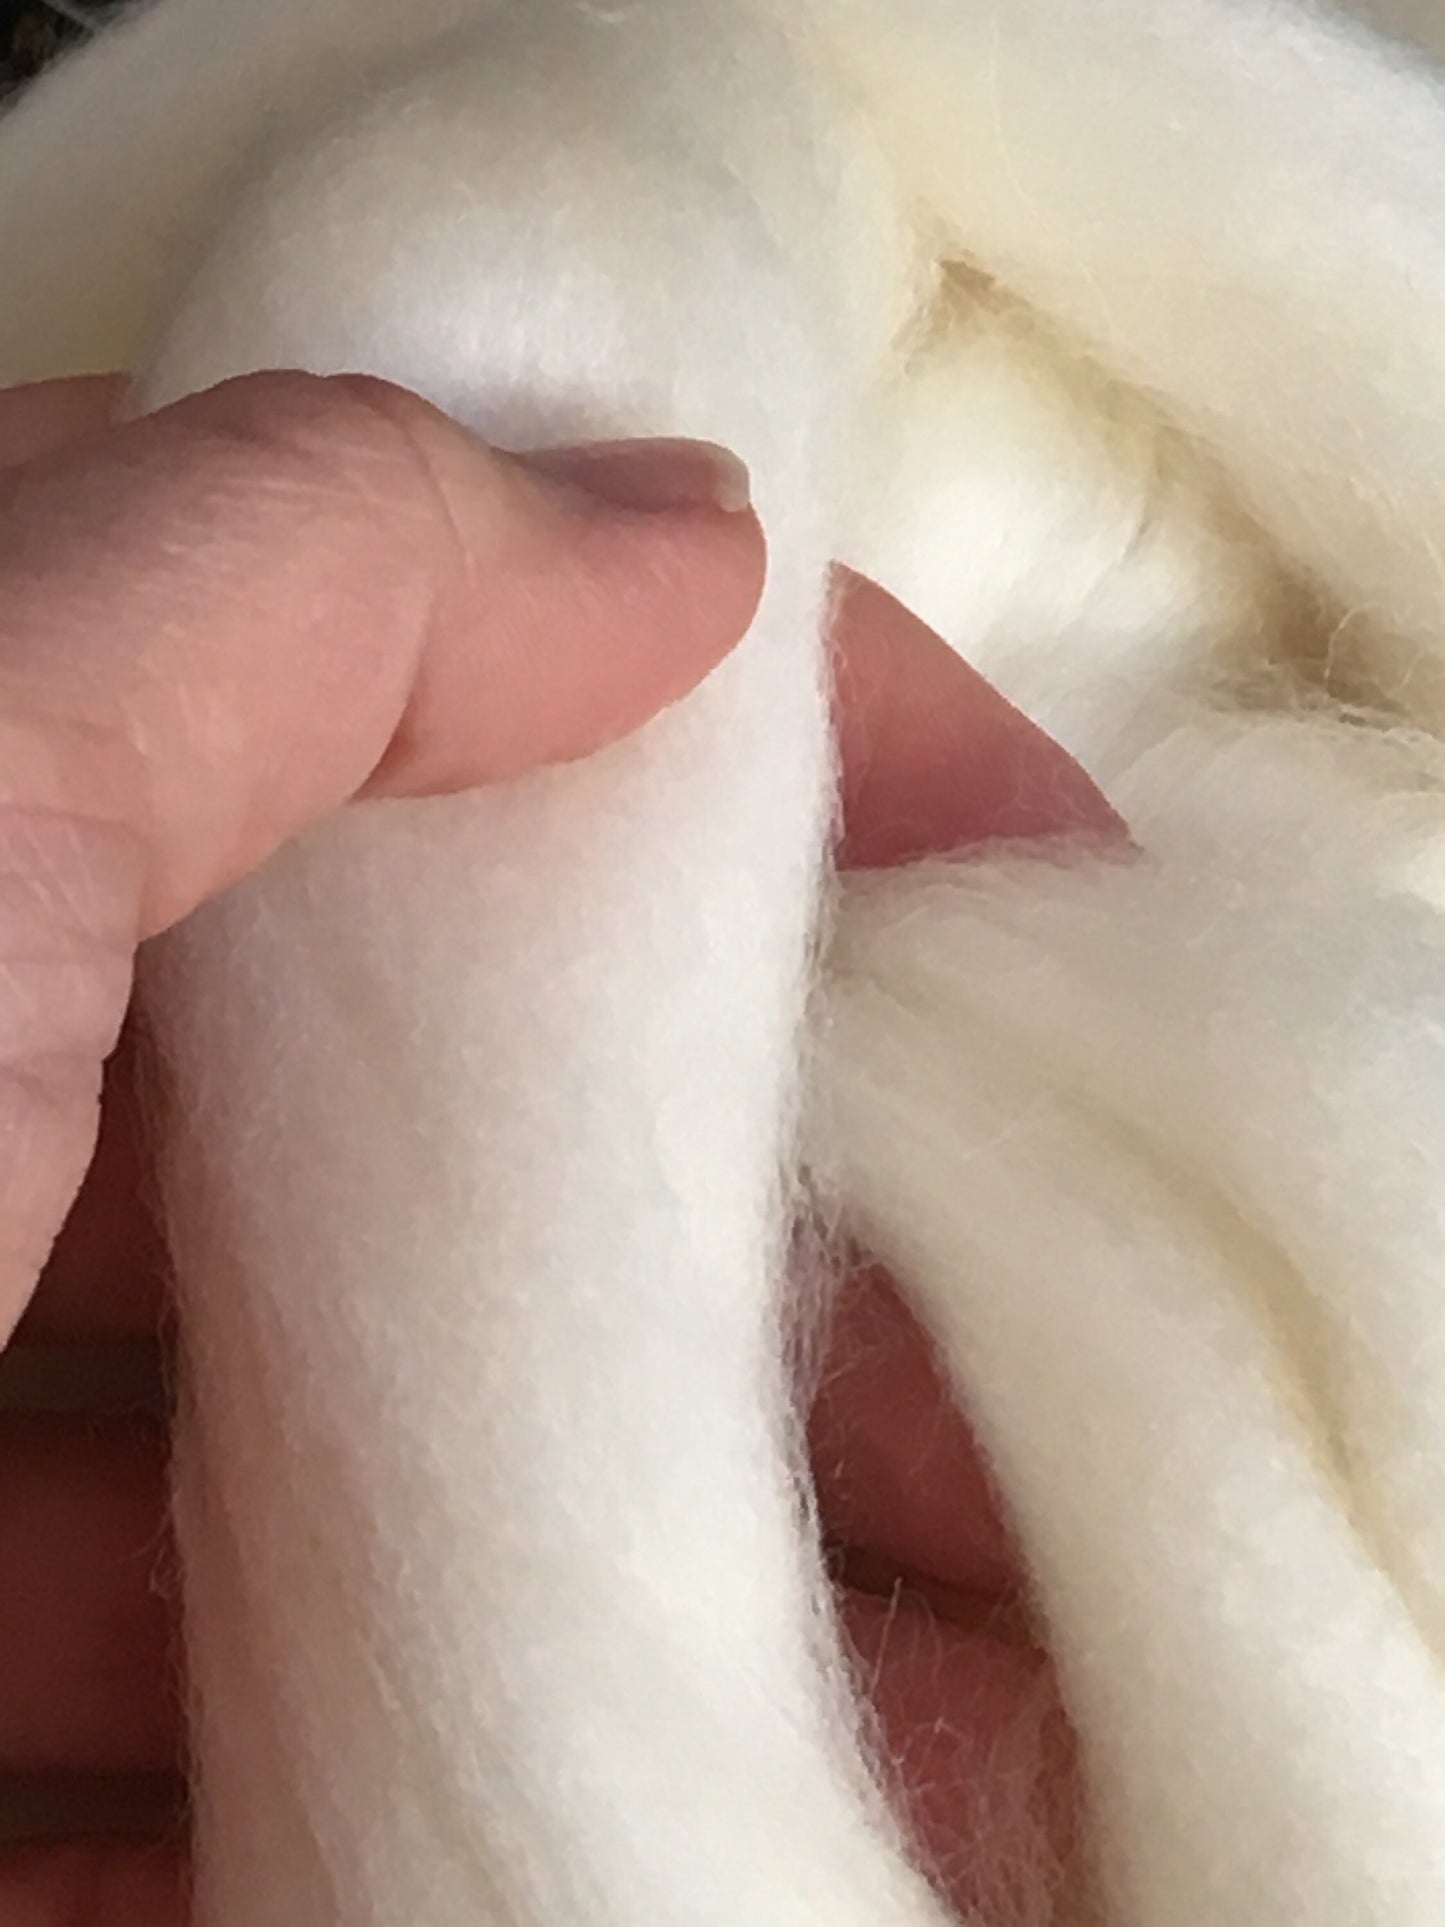 White Wool Top Roving Fiber Spinning, Undyed Wool Roving, Wool For Spinning, Wool For Felting, Wool For Chunky Knit Blanket